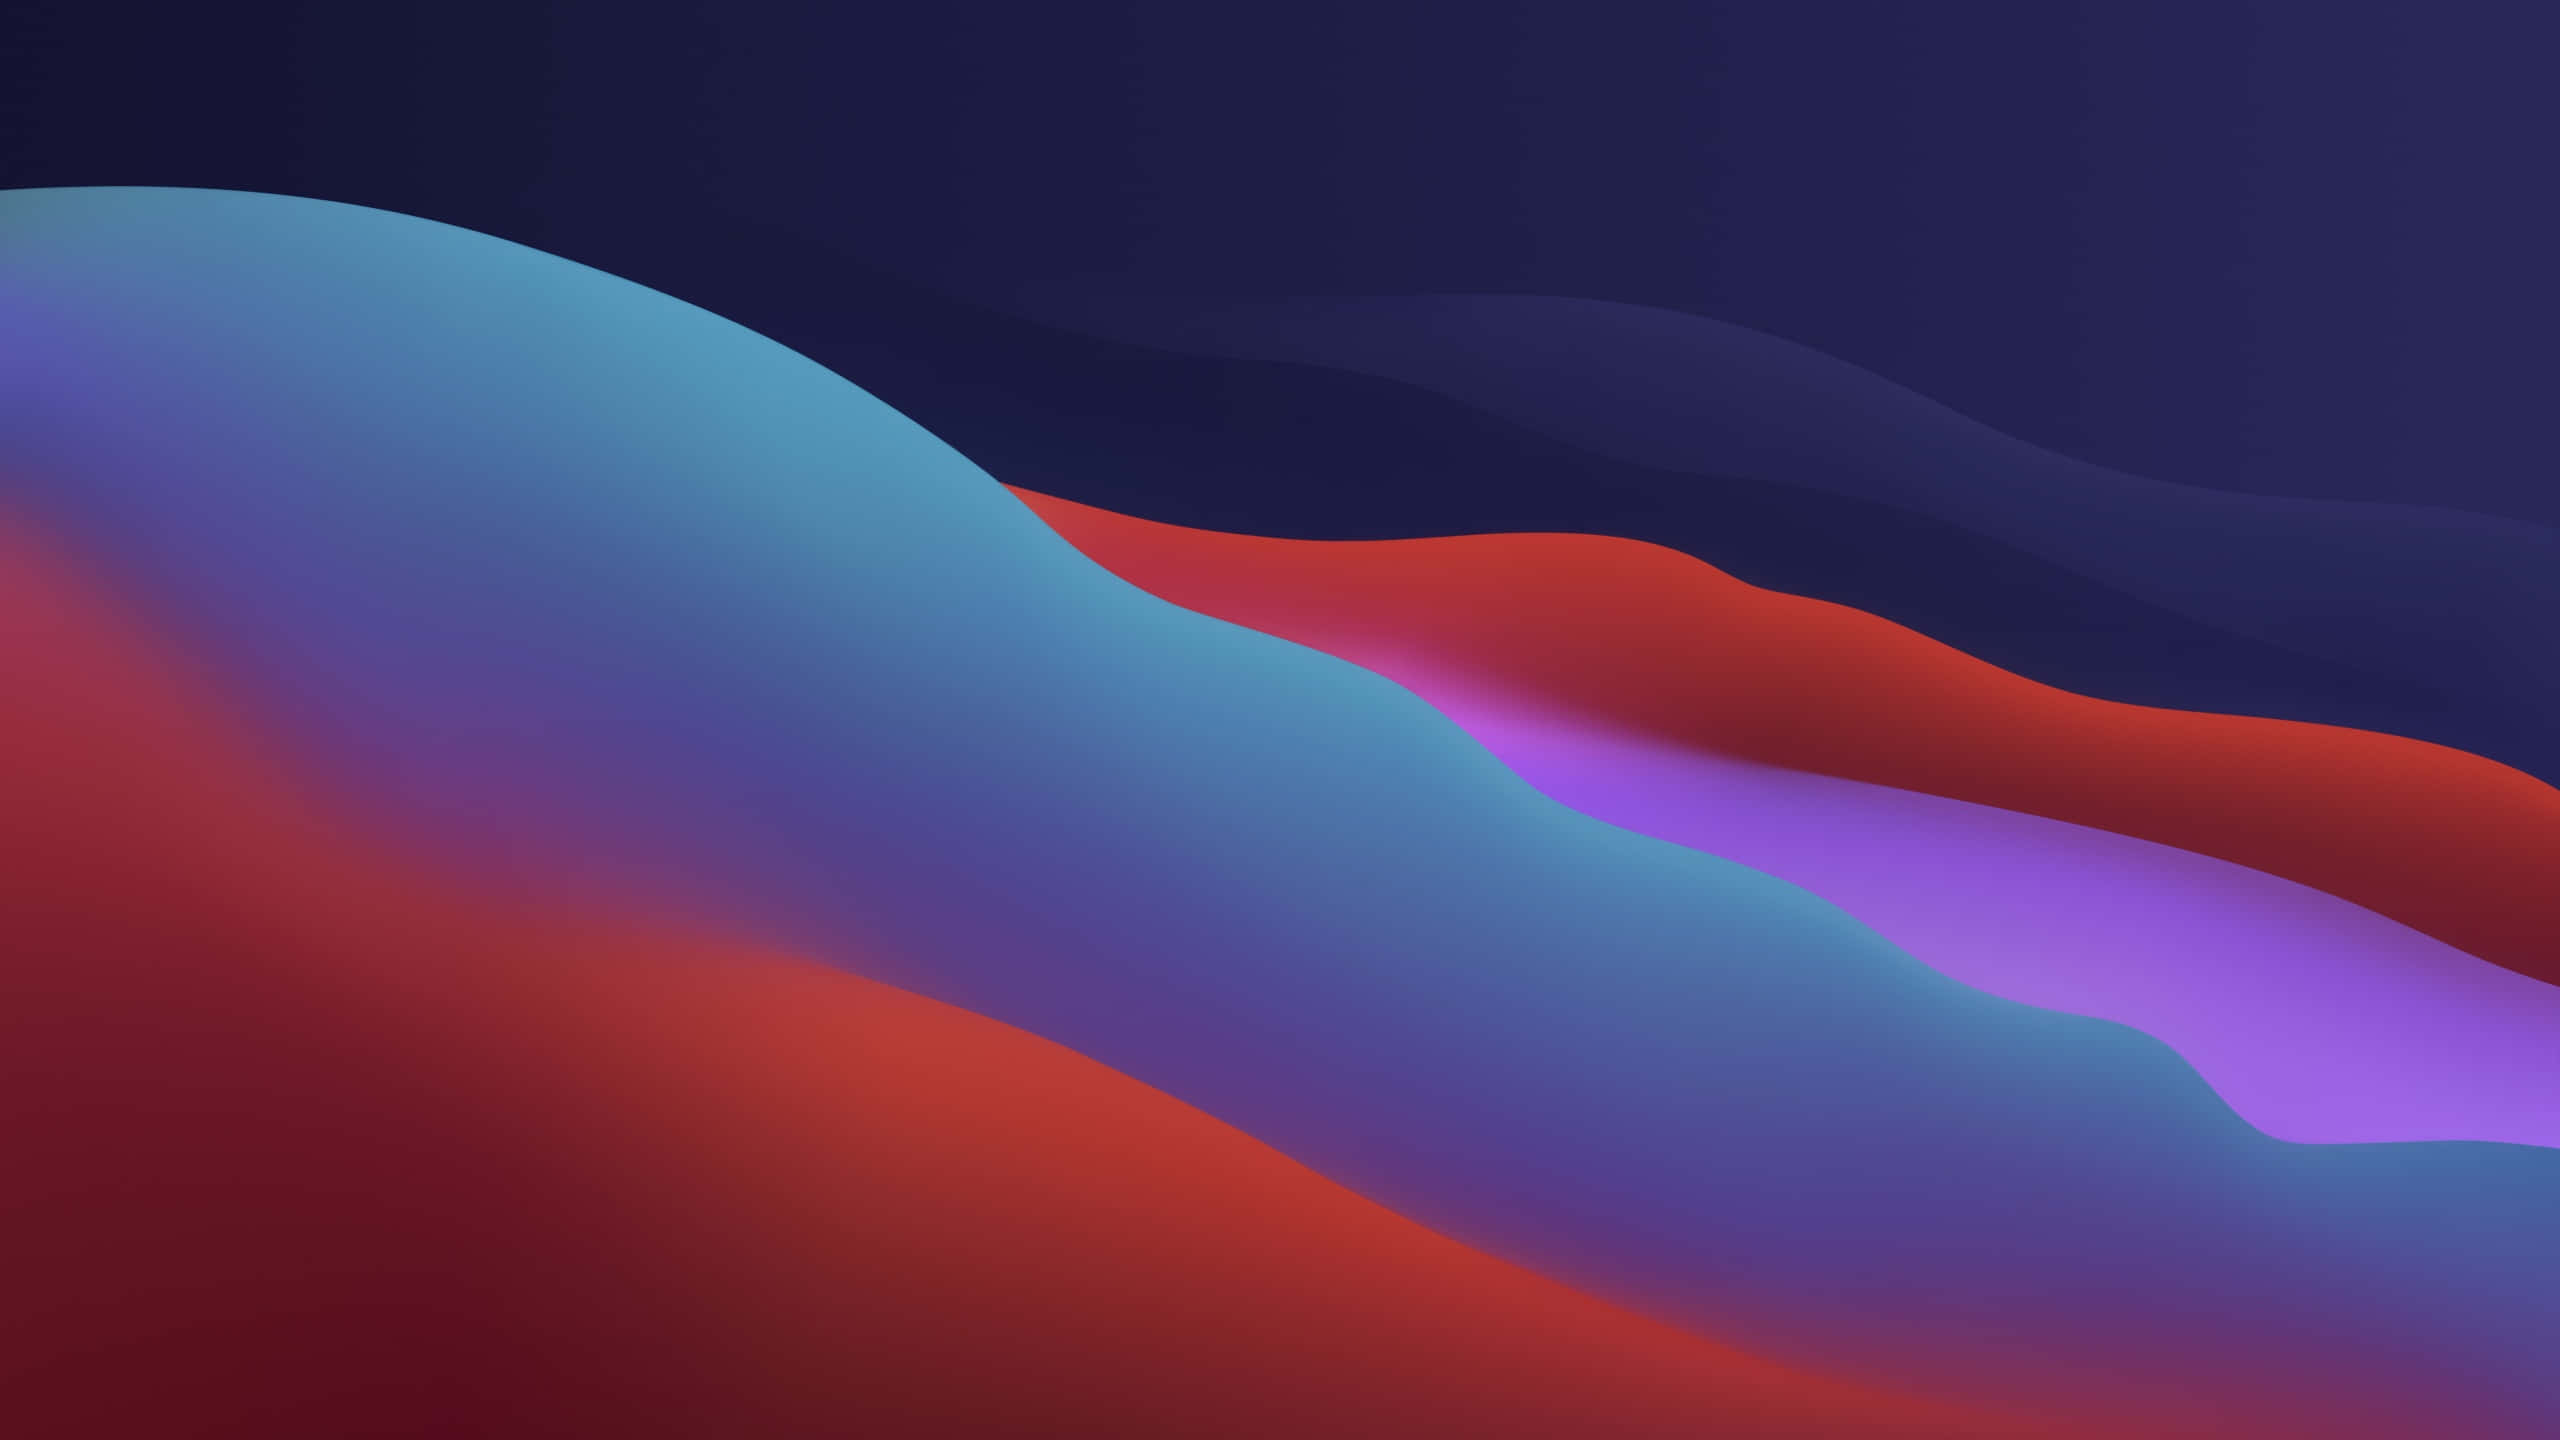 Download Enjoy a vibrant landscape on your macos device | Wallpapers.com